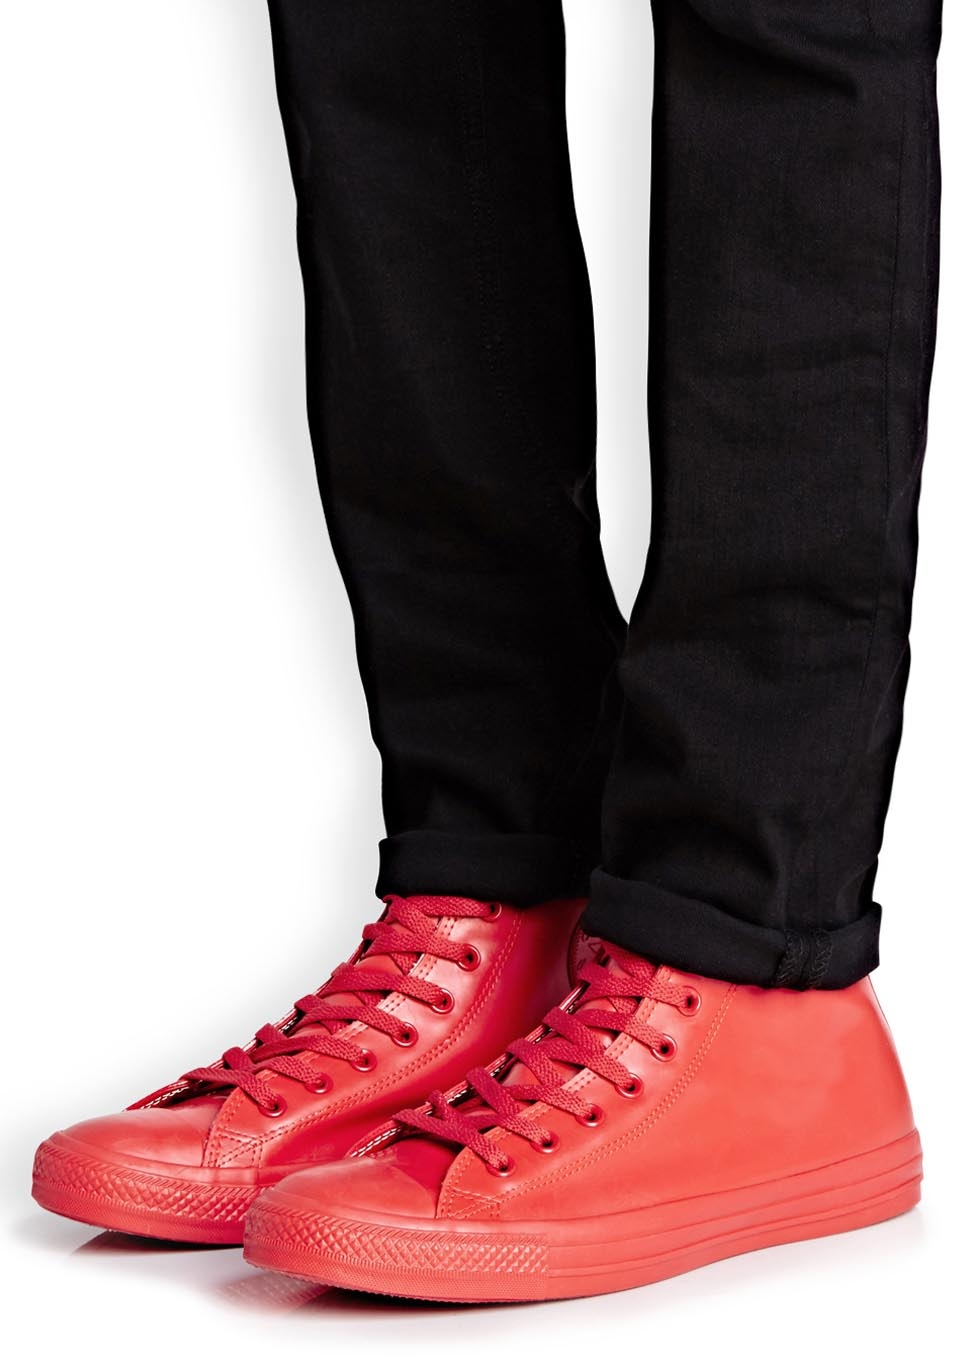 red rubber converse